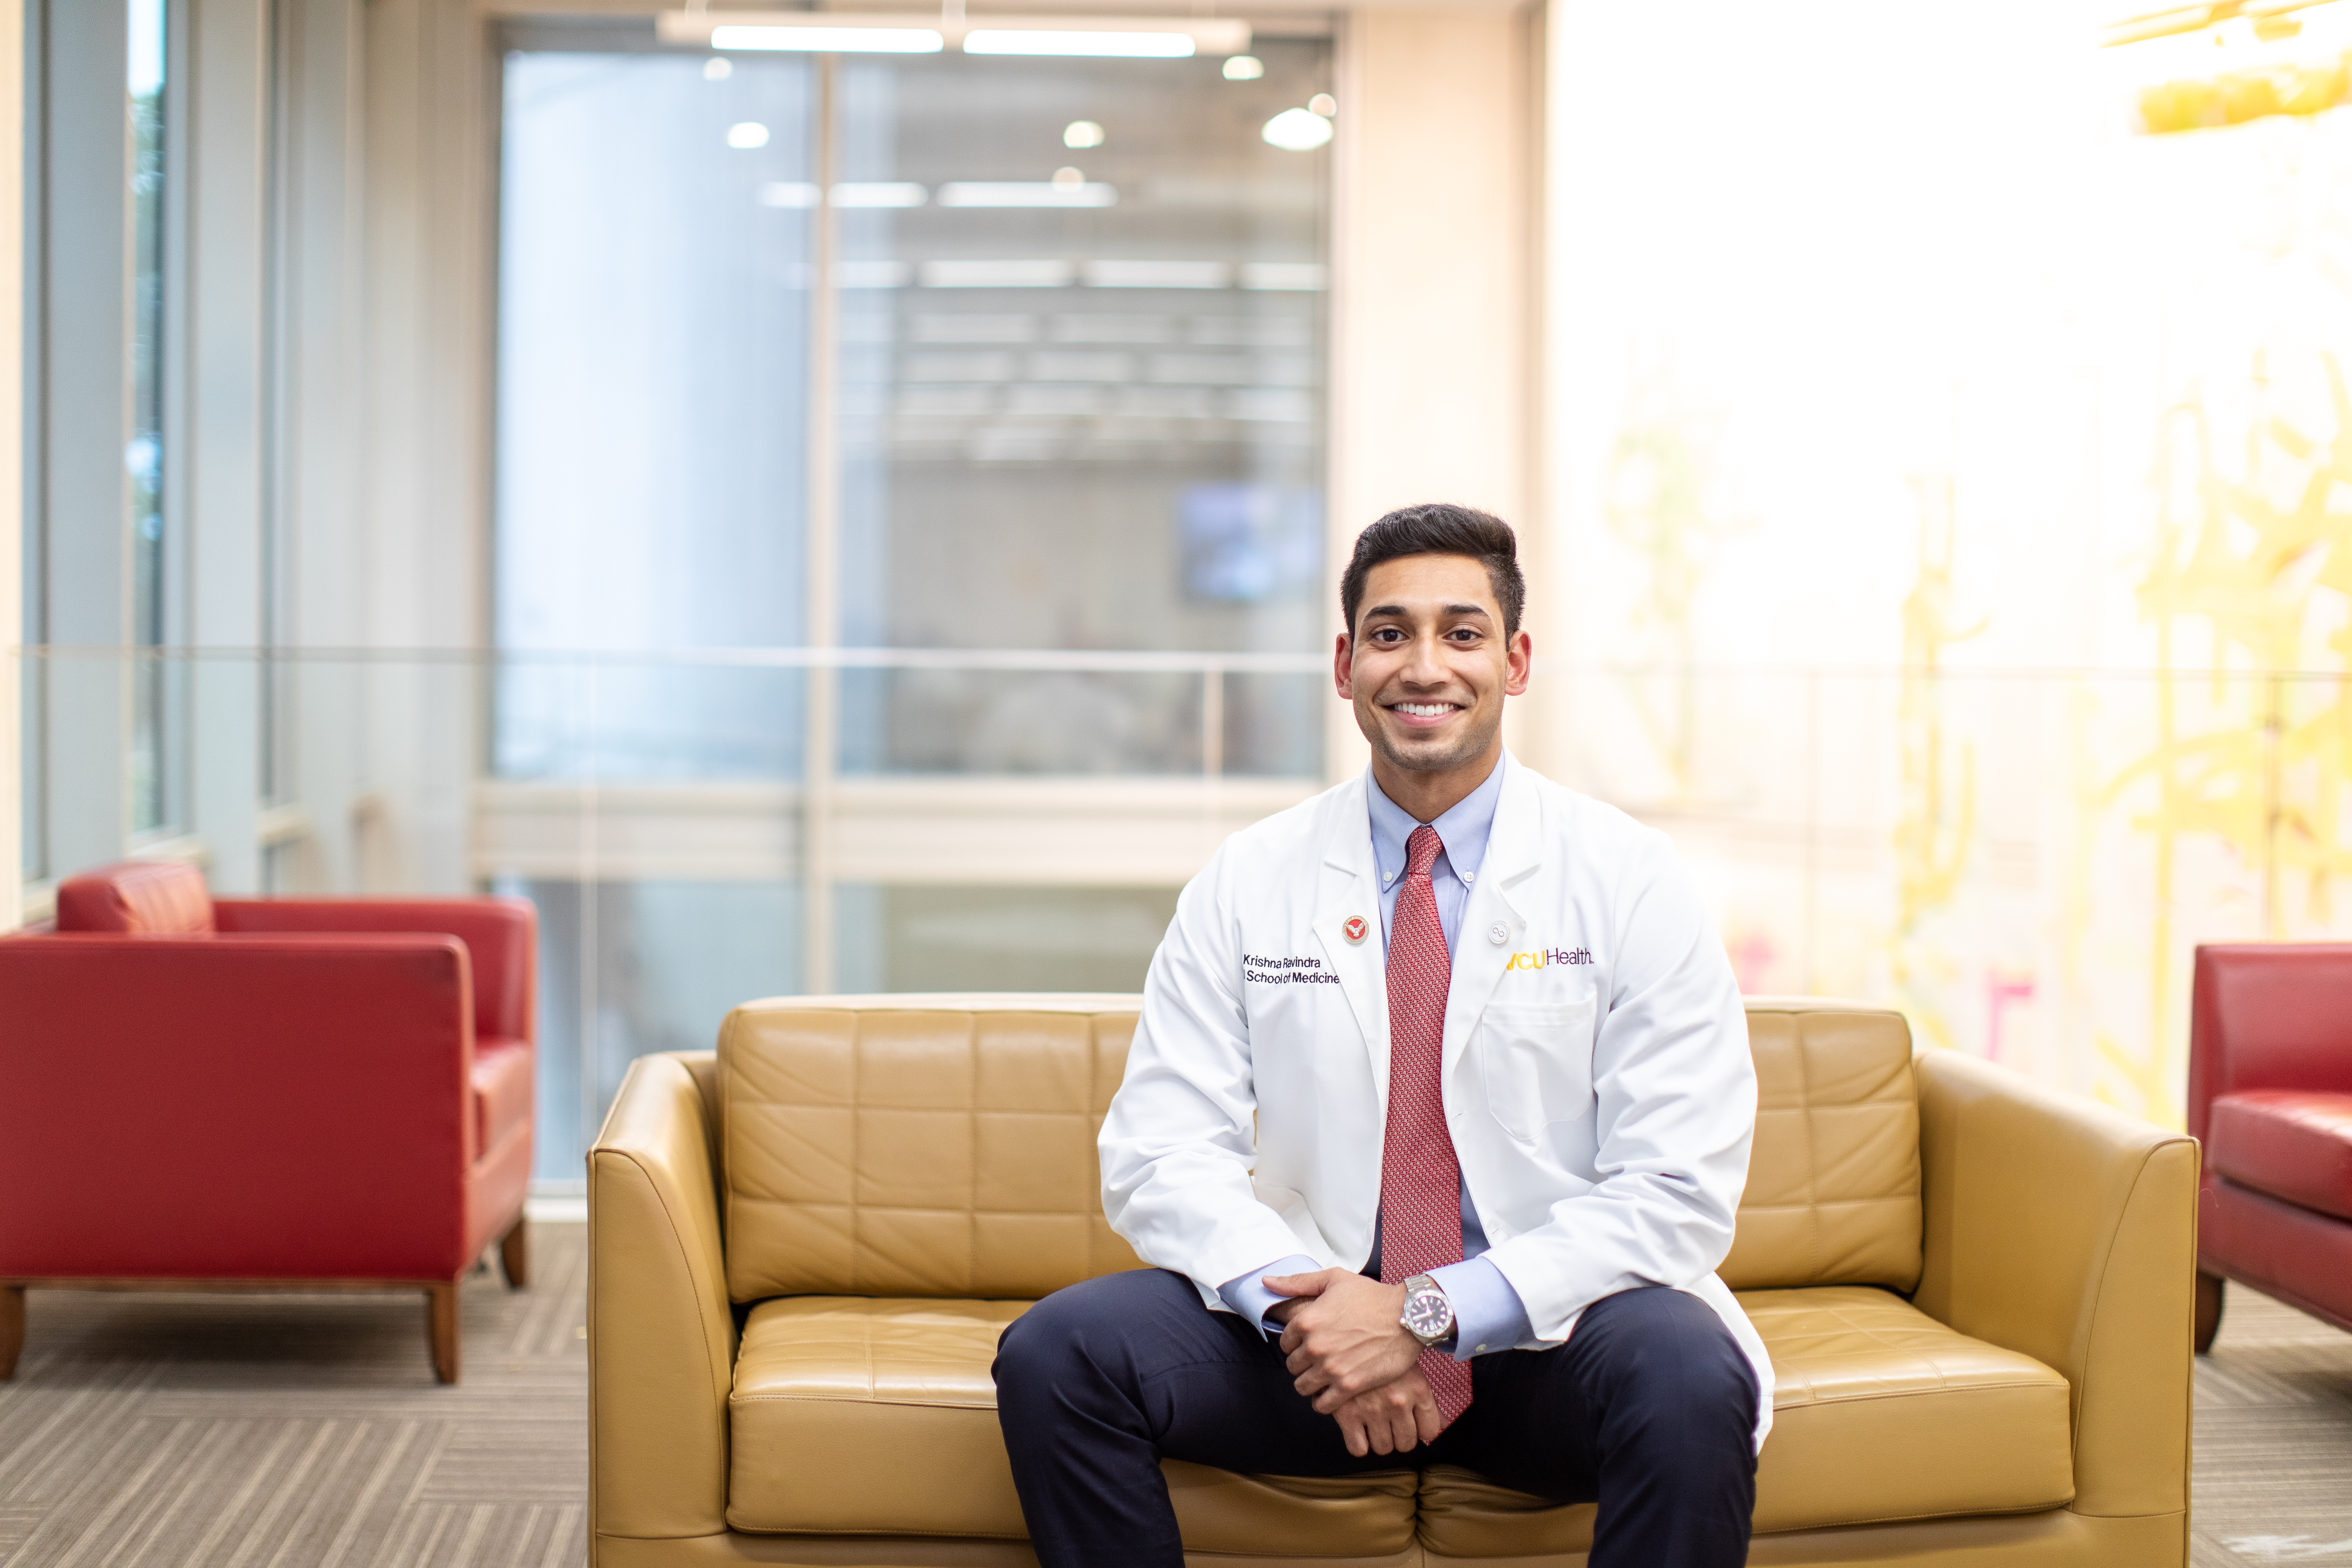 VCU Link connects med students and alumni